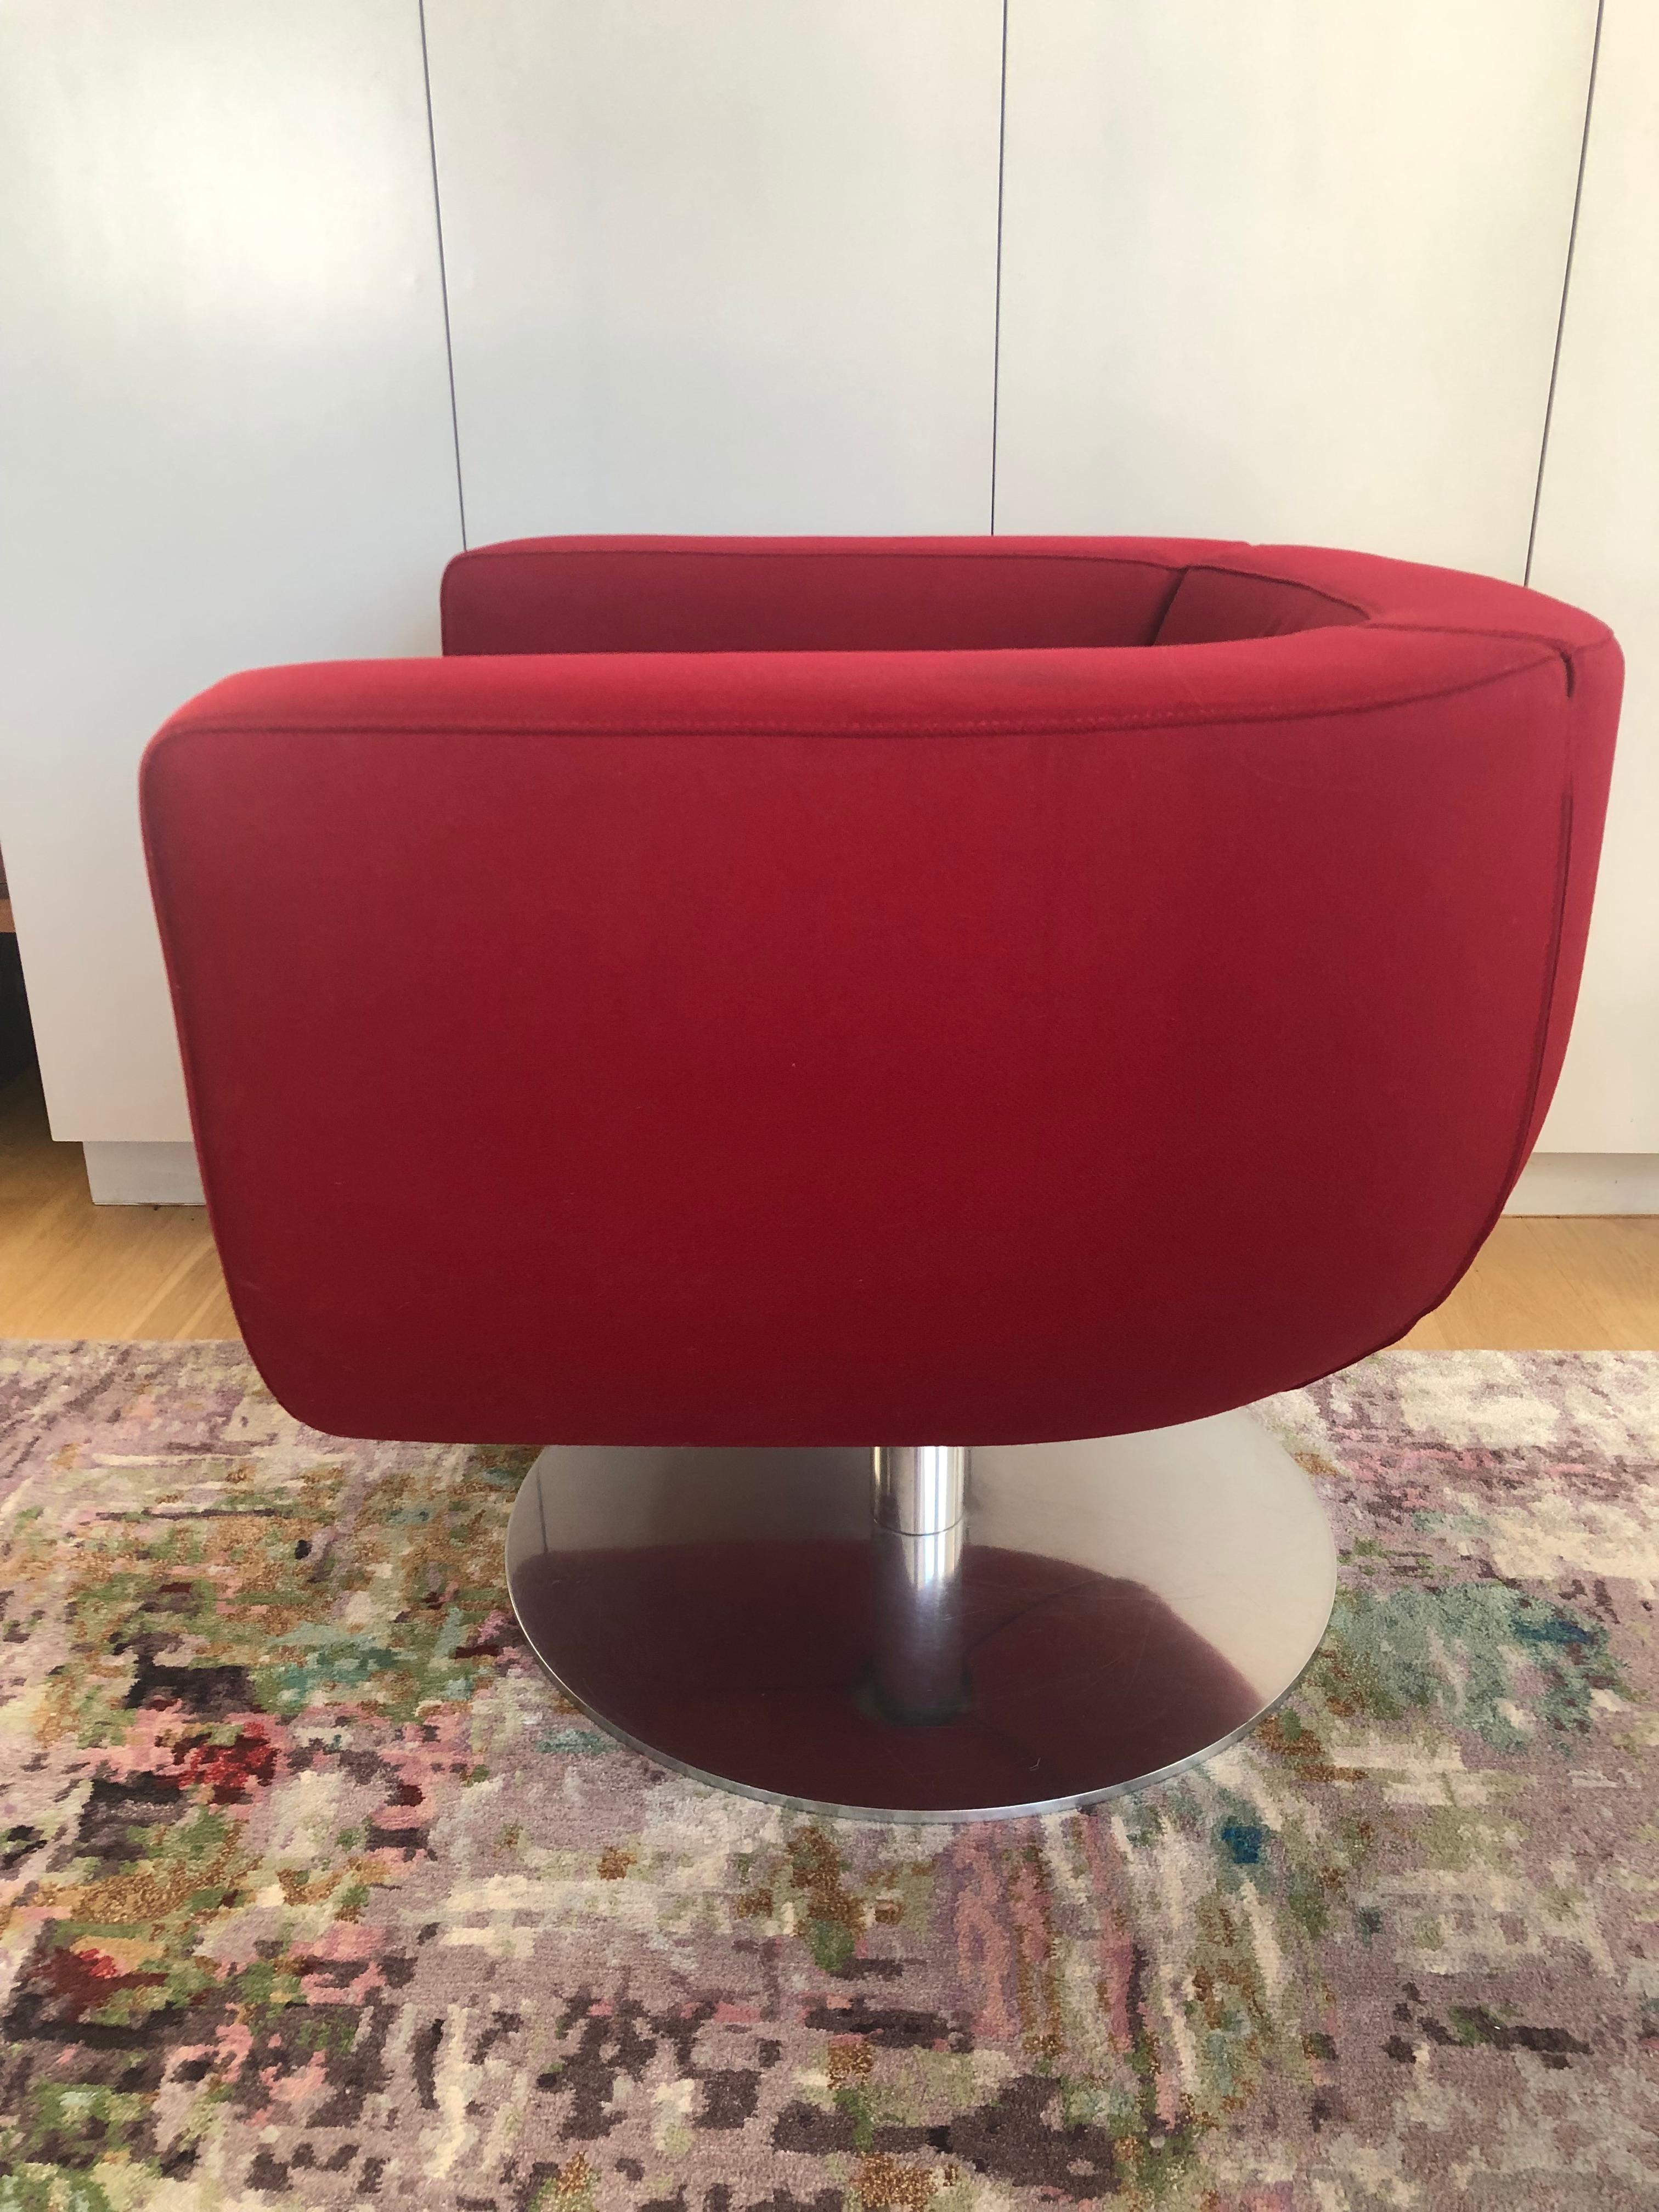 Pair of Red Tulip Chairs by Jeffrey Bernett for B&B Italia Chrome Base In Good Condition For Sale In Old Romney, Kent